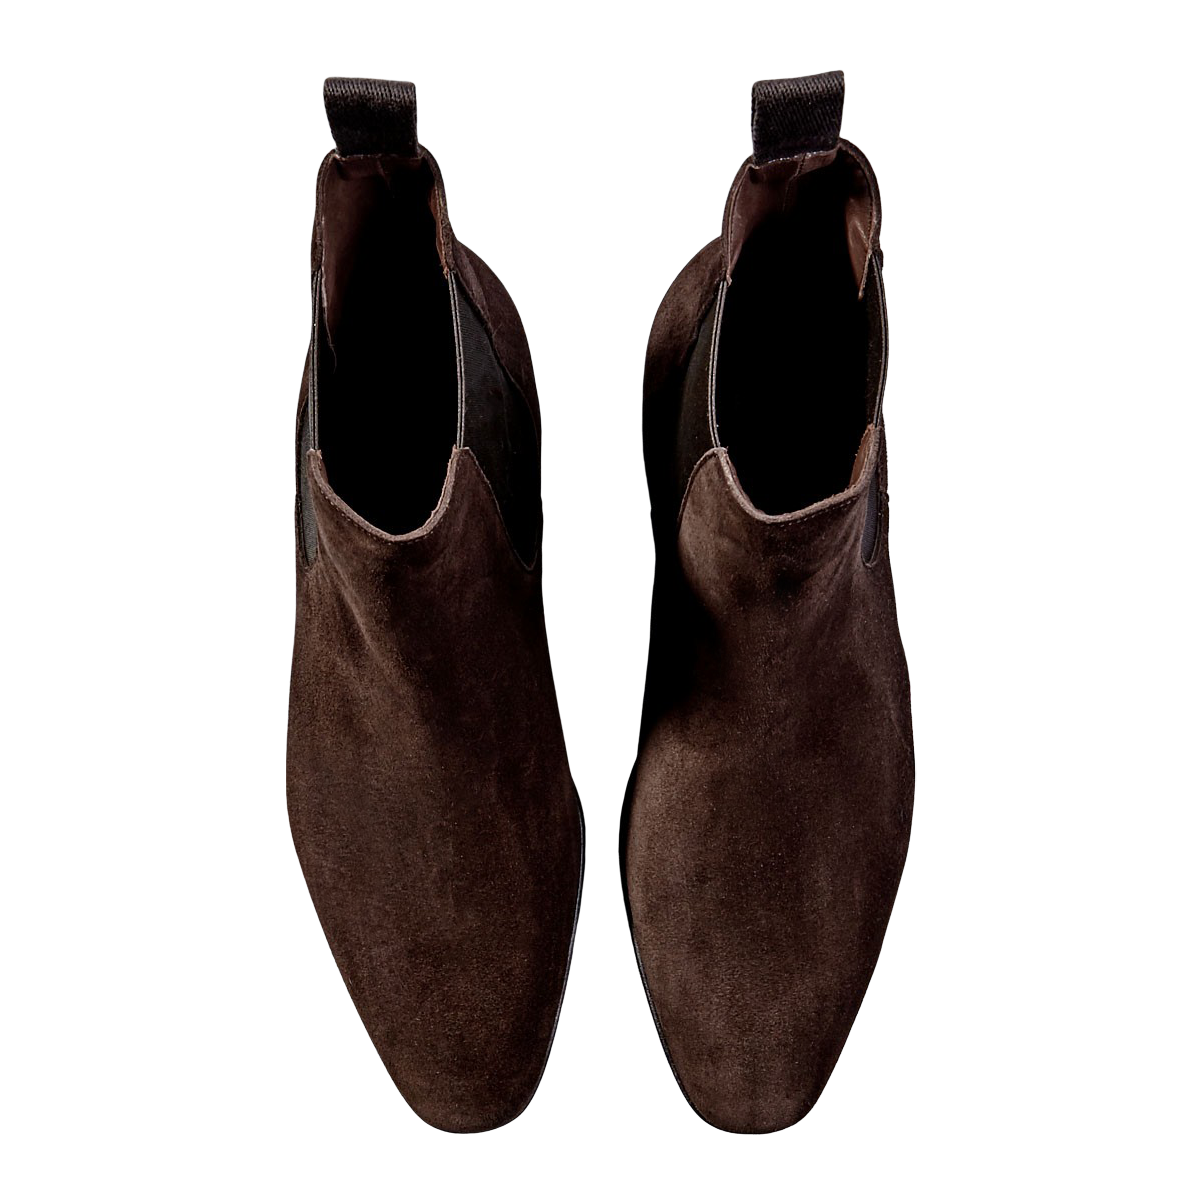 A pair of Dark Brown Suede Carmina Simpson Chelsea Boots on a white background.